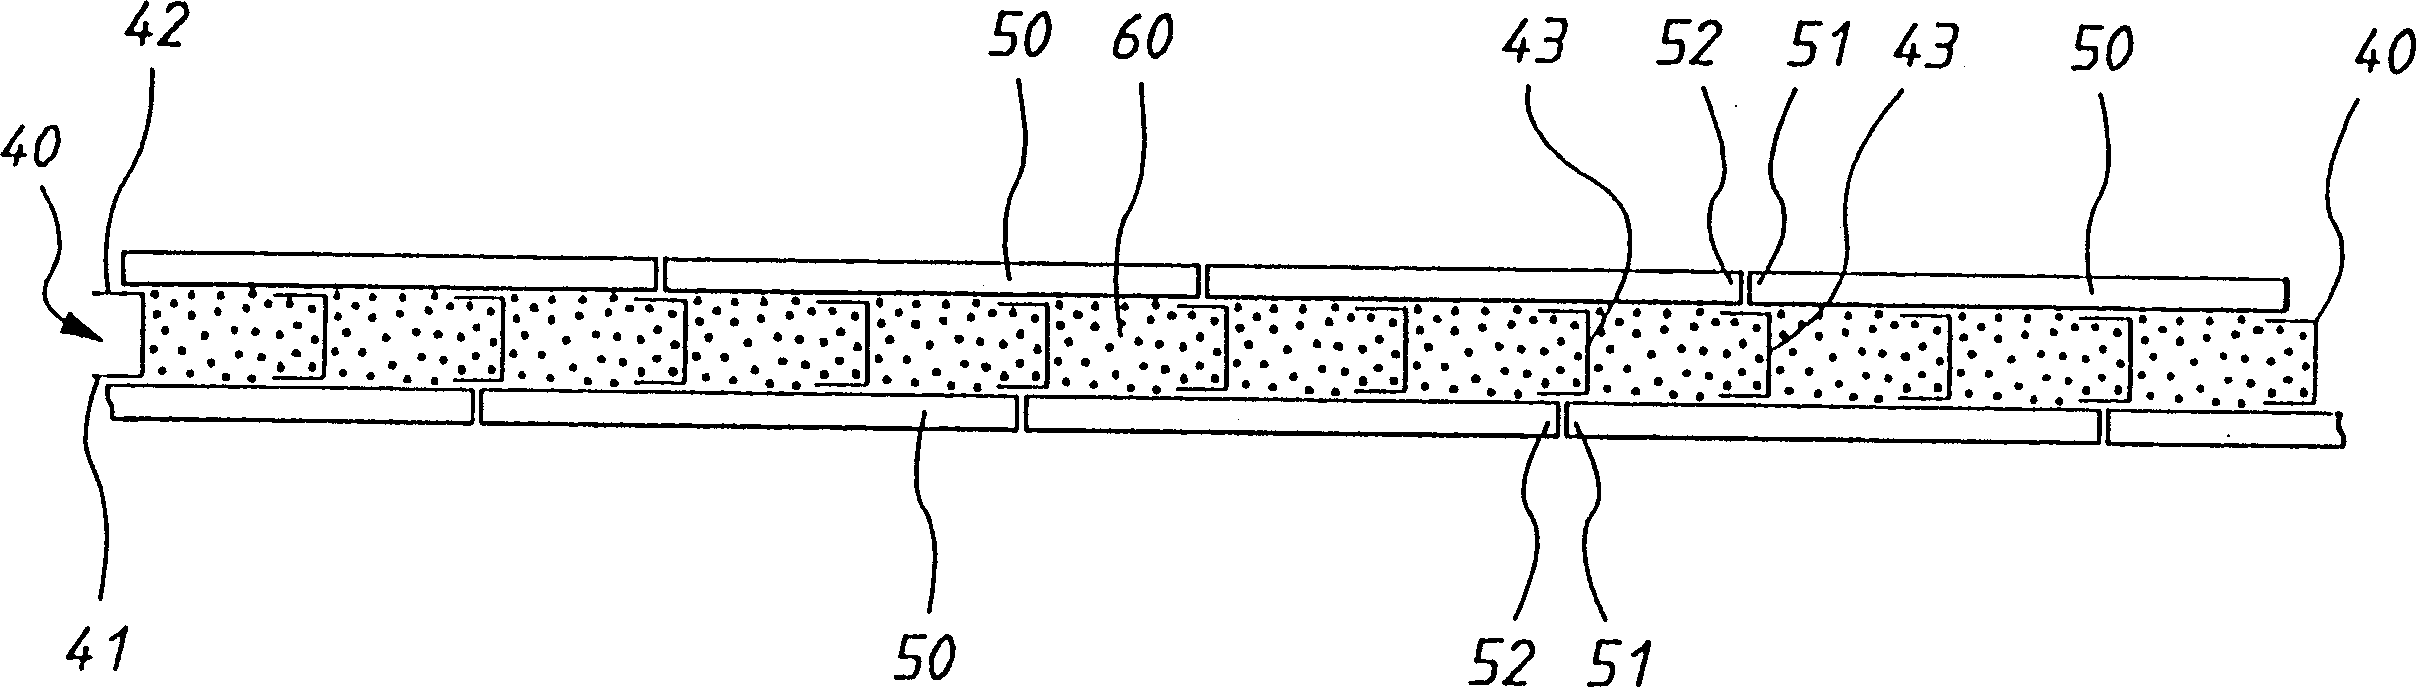 Wall member and method for construction thereof